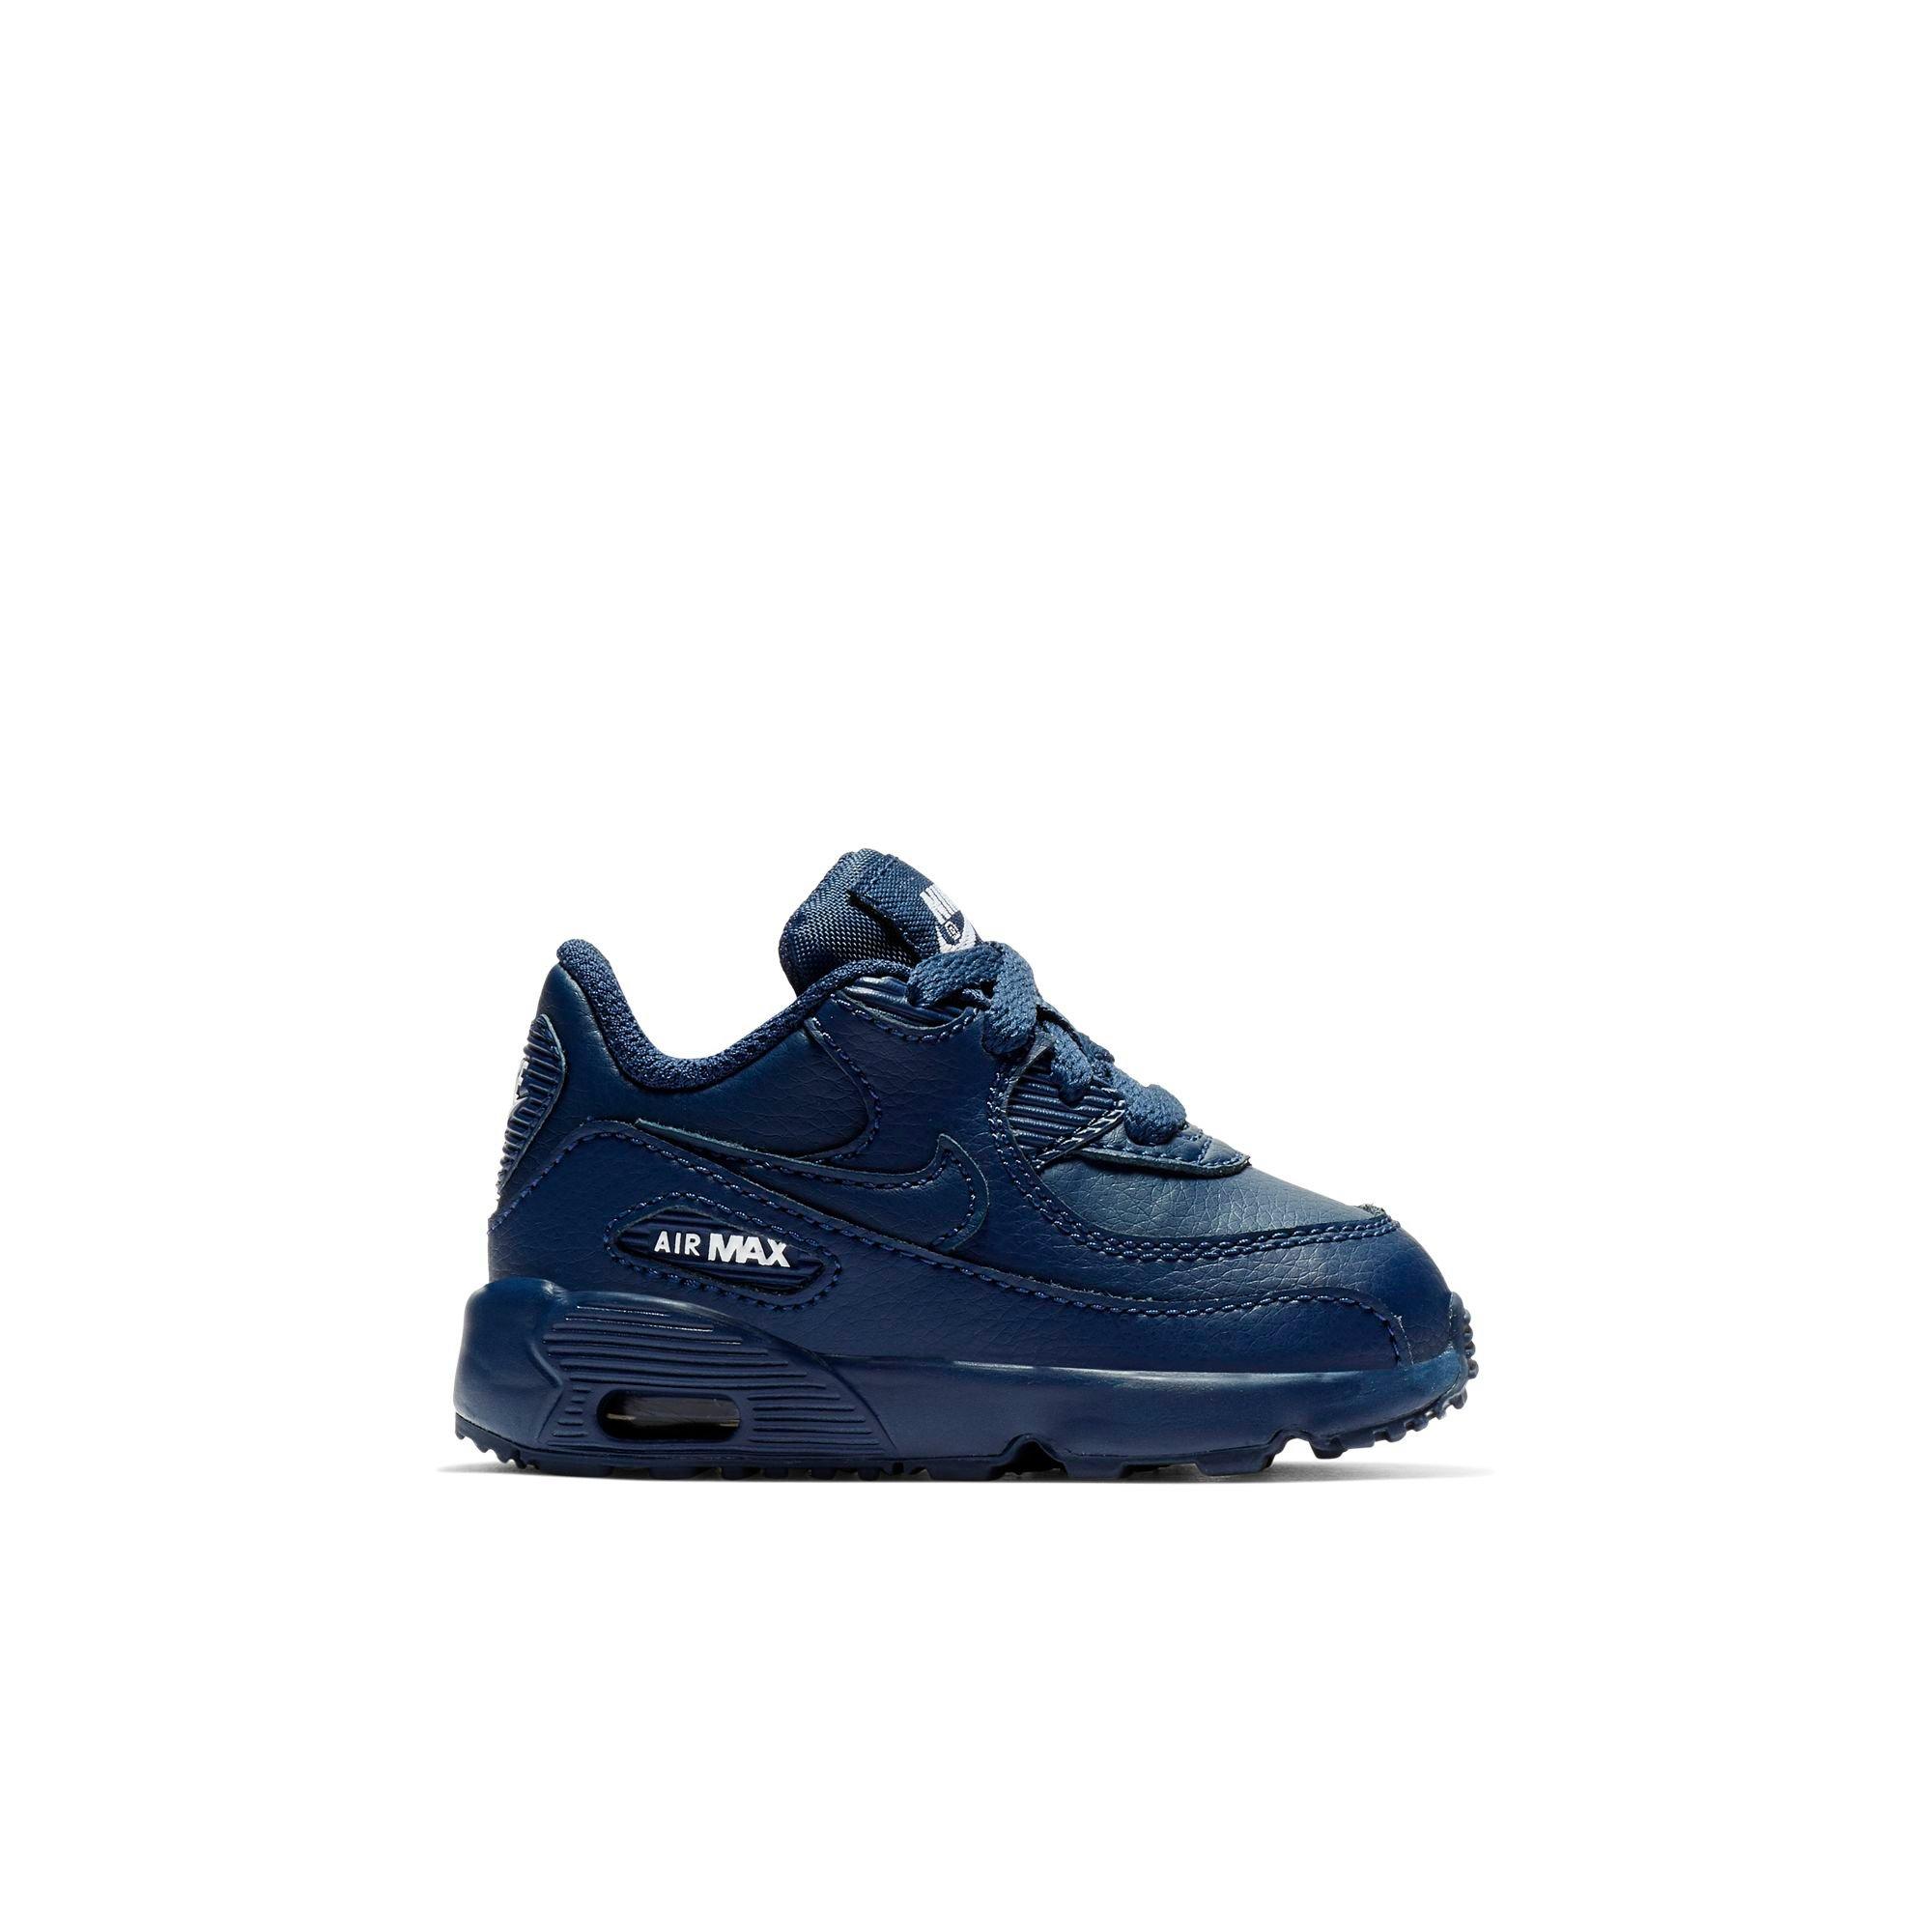 blue nikes for toddlers